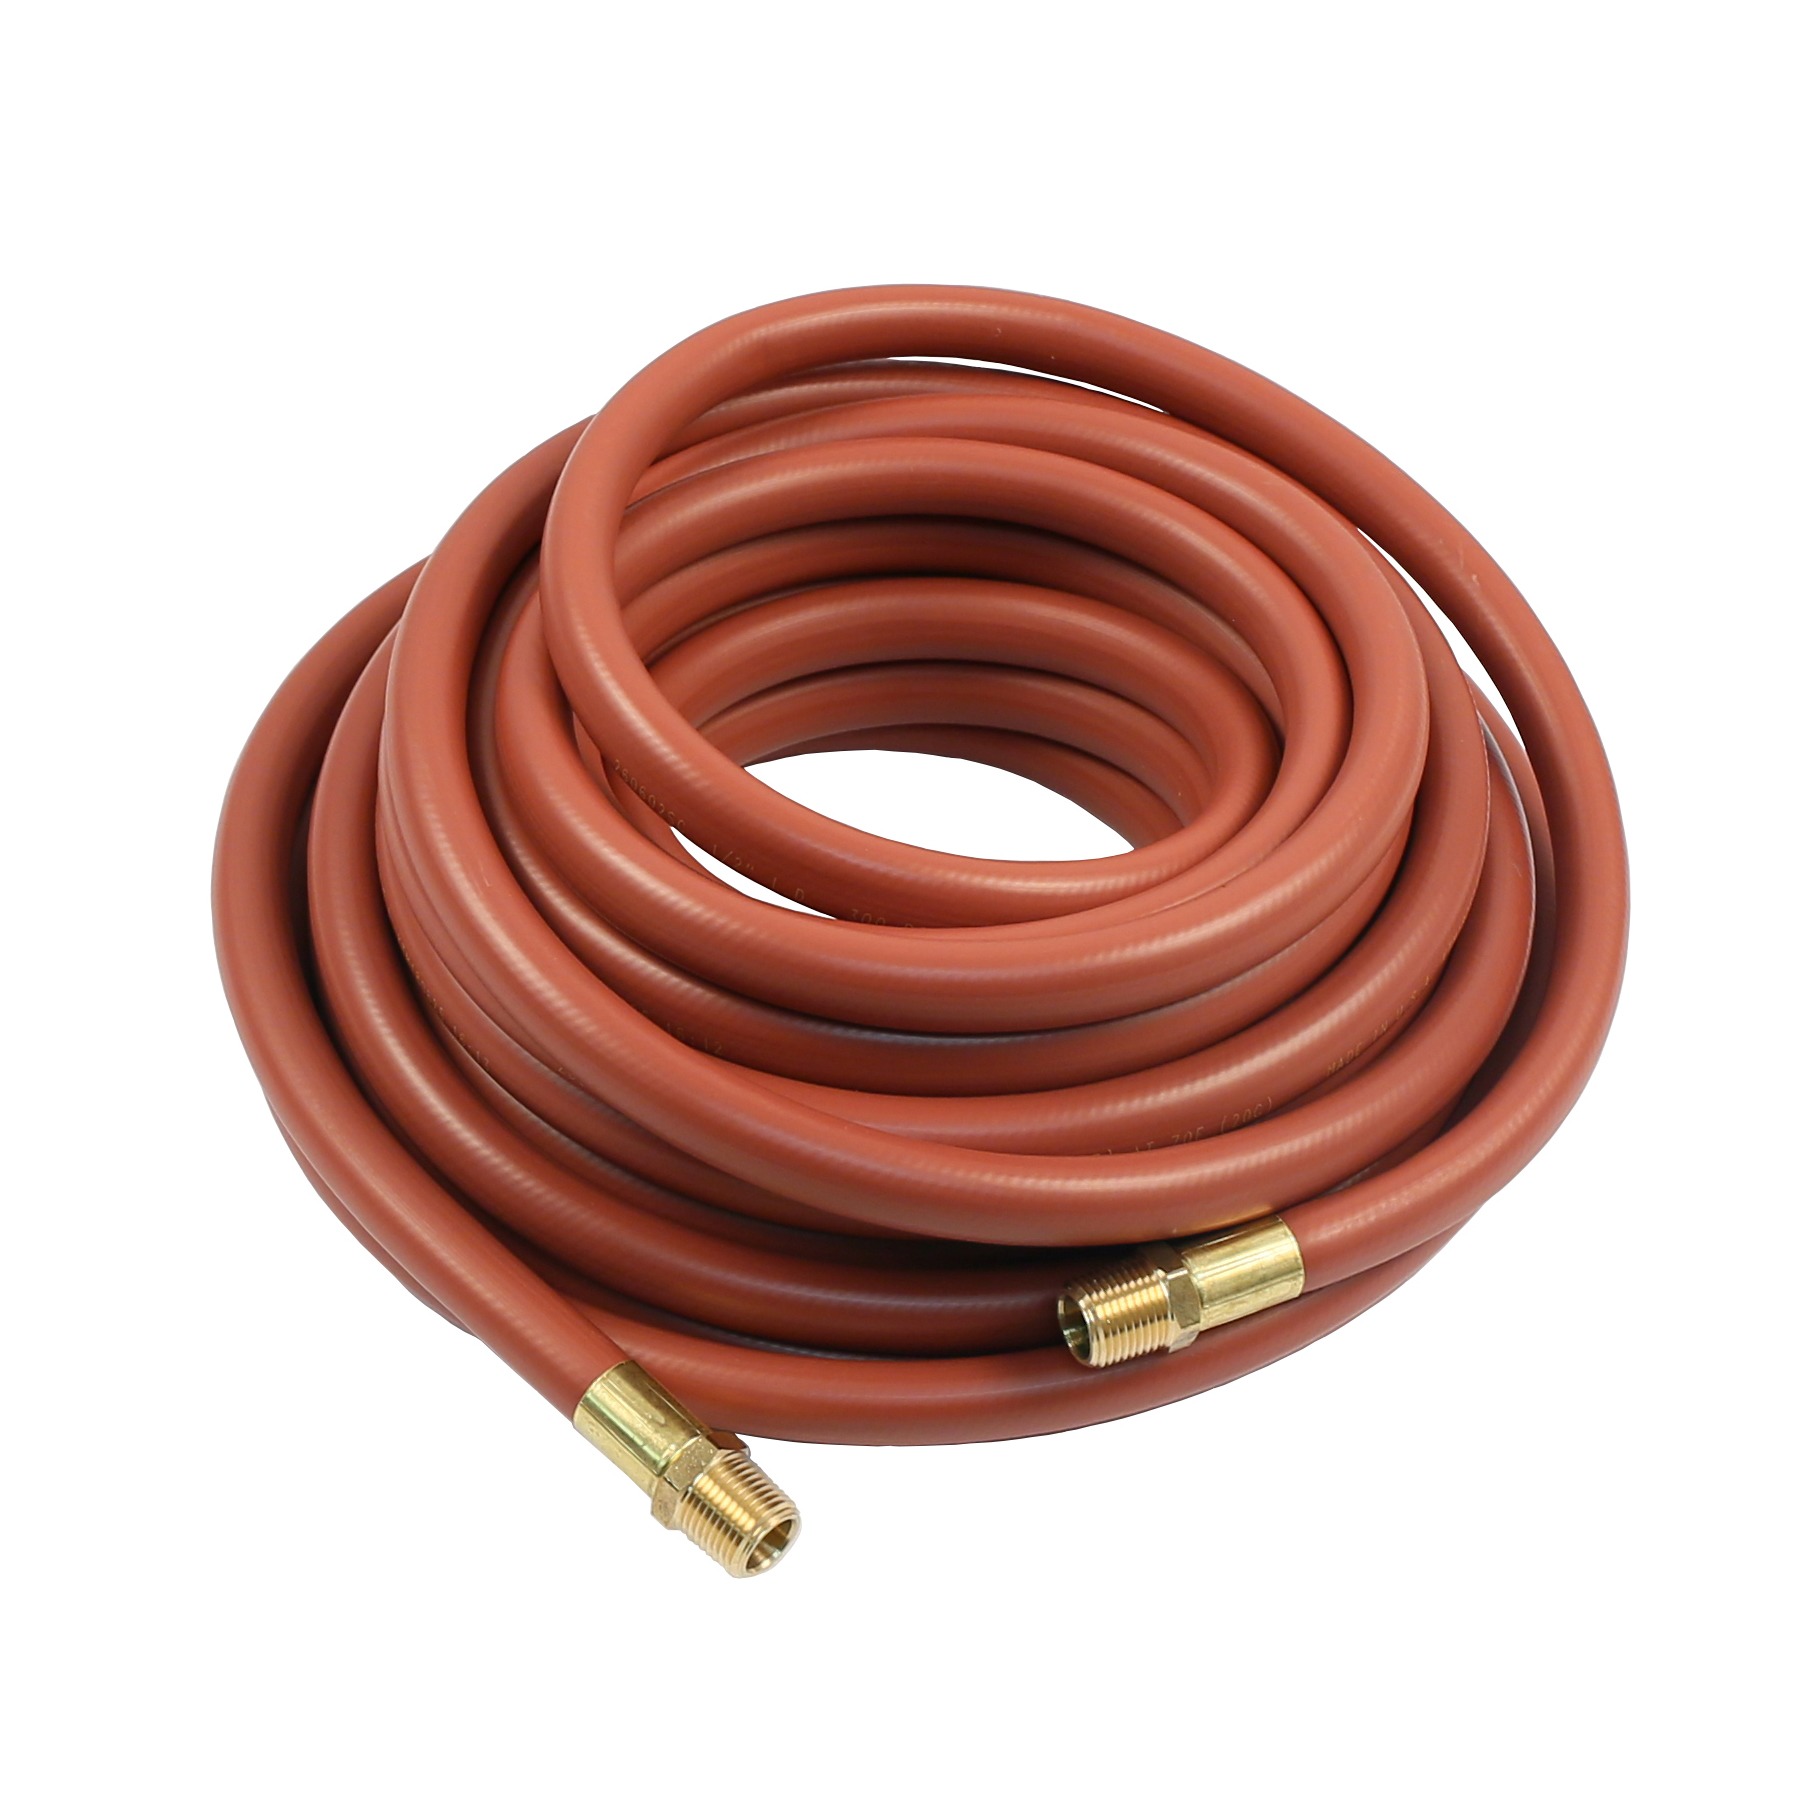 Reelcraft S601022-300 - 1/2 in. x 300 ft. Low Pressure Air/Water Hose